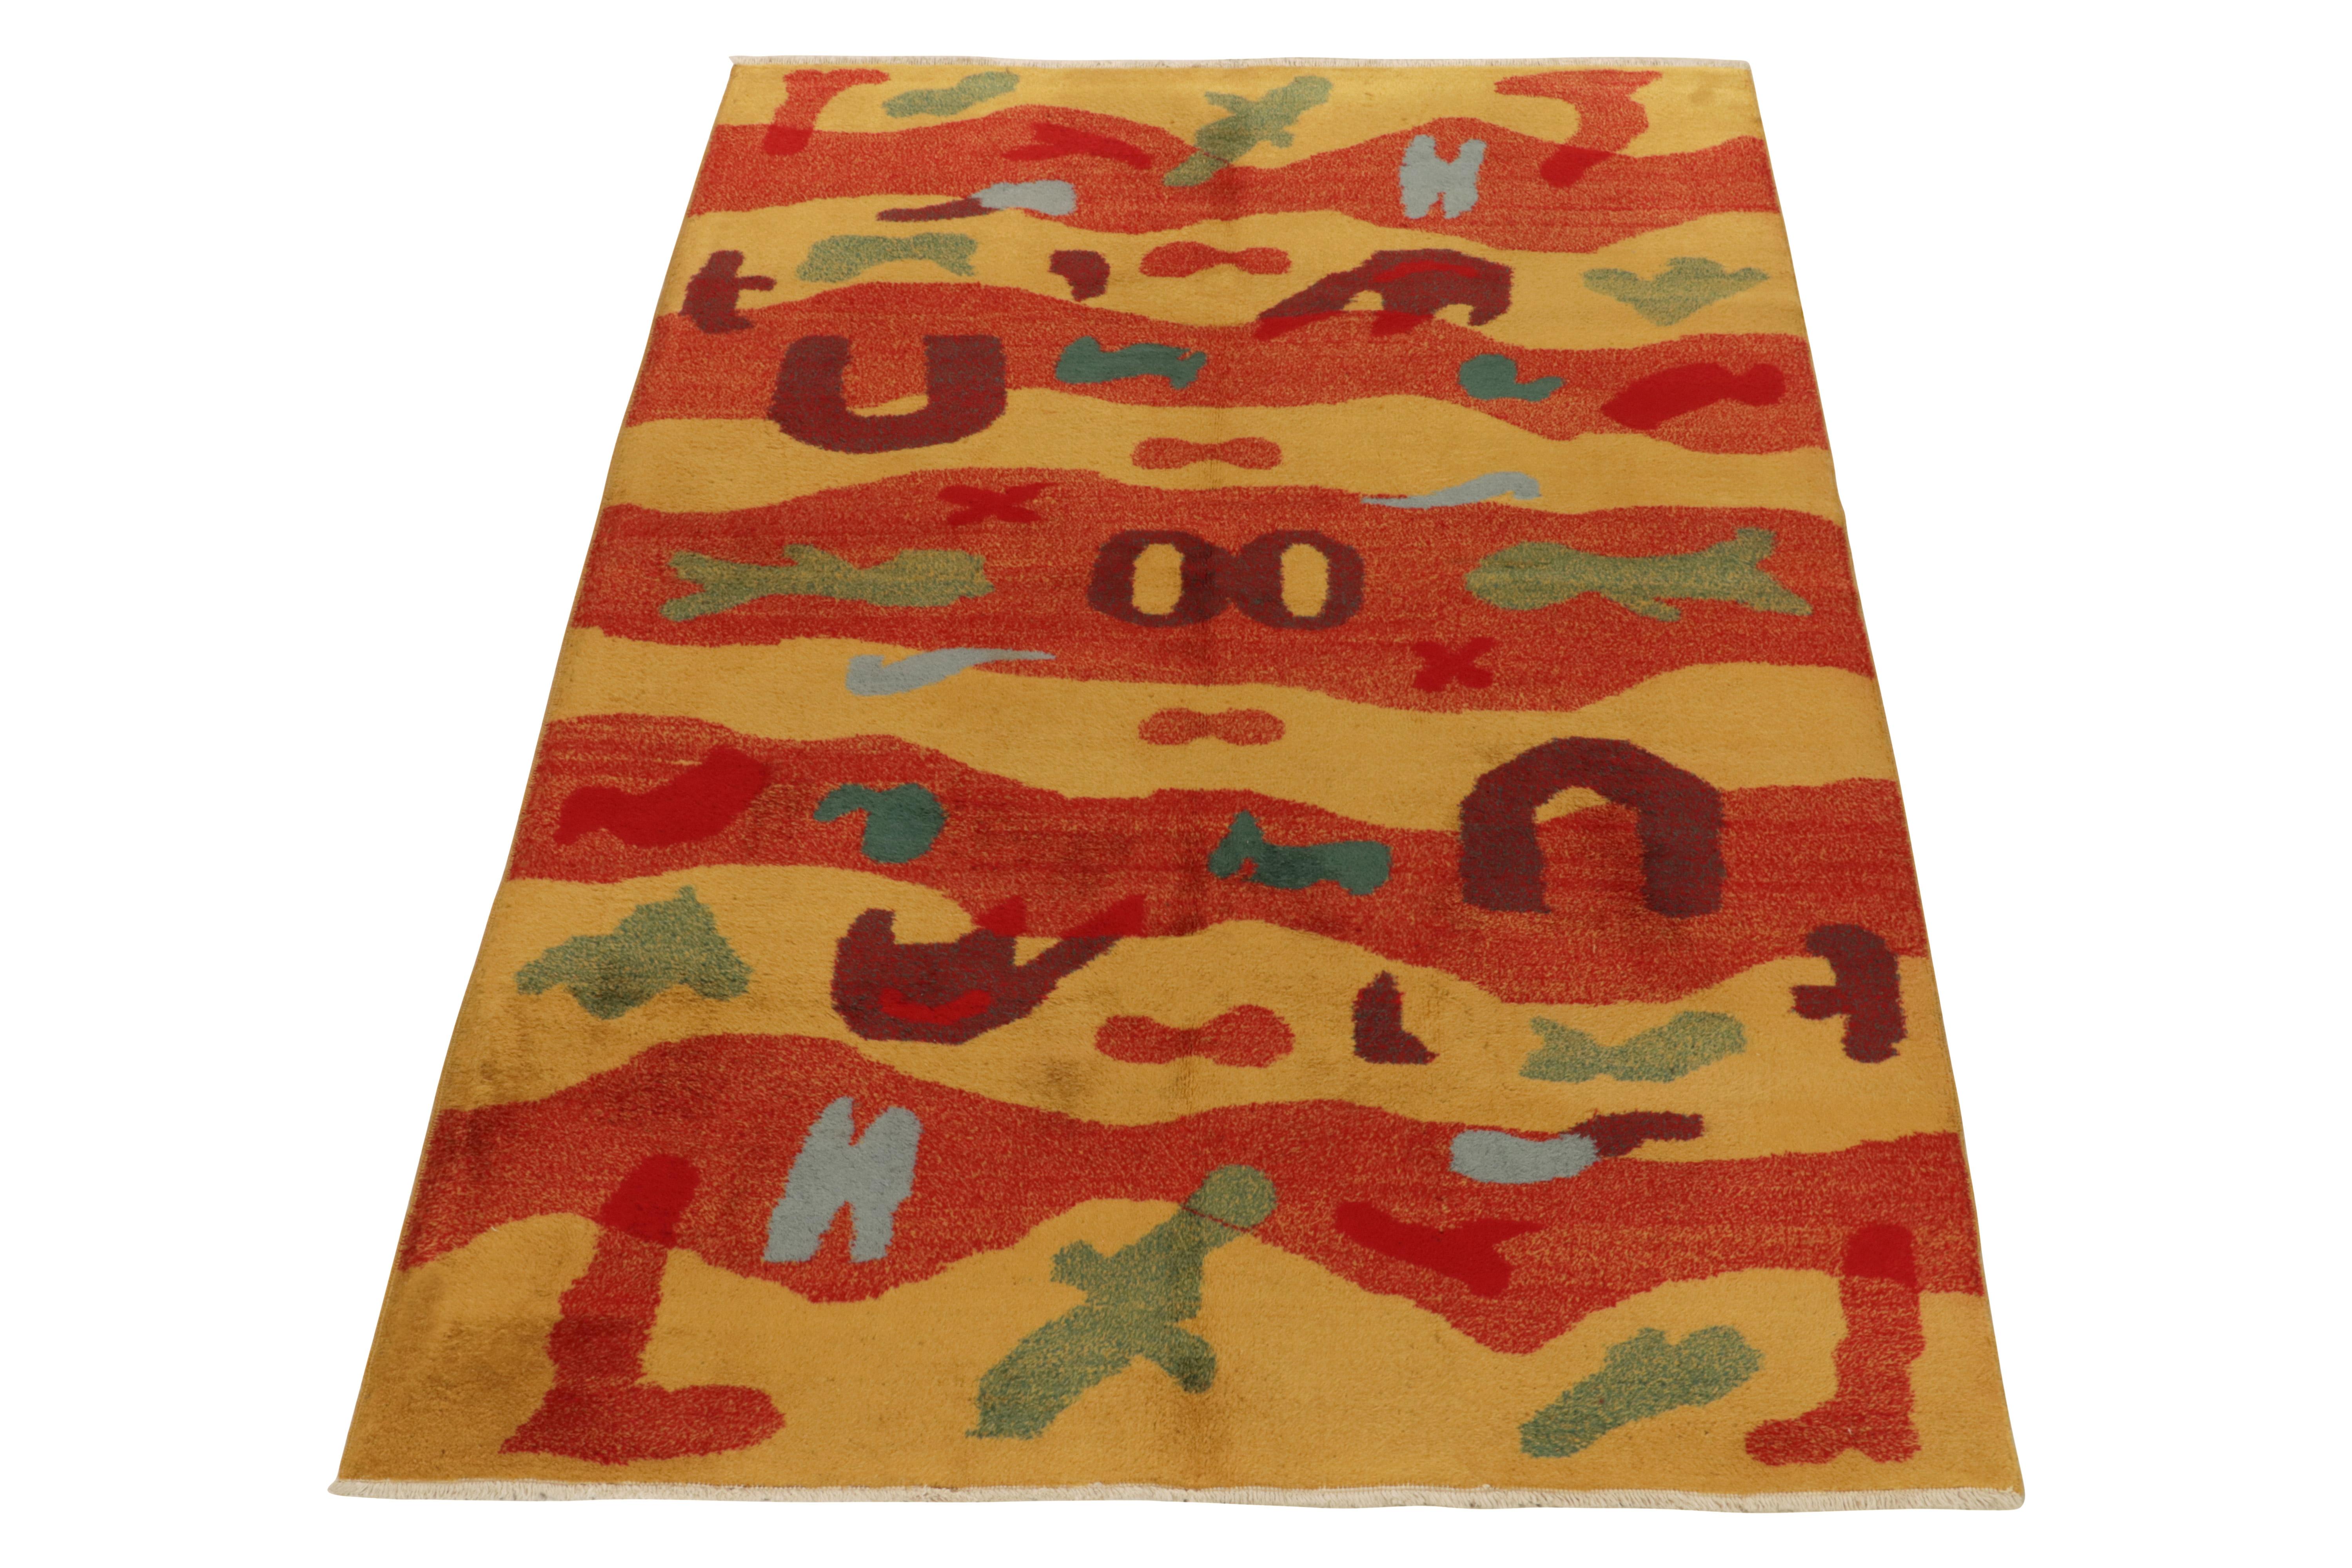 A specimen of artisanal conviction, this 5x8 vintage distressed rug emanates the exclusivity of the Turkish style in the 1960s. 

Employing hand-knotted wool, this phenomenal drawing from a bold Turkish designer witnesses a distinctive geometric